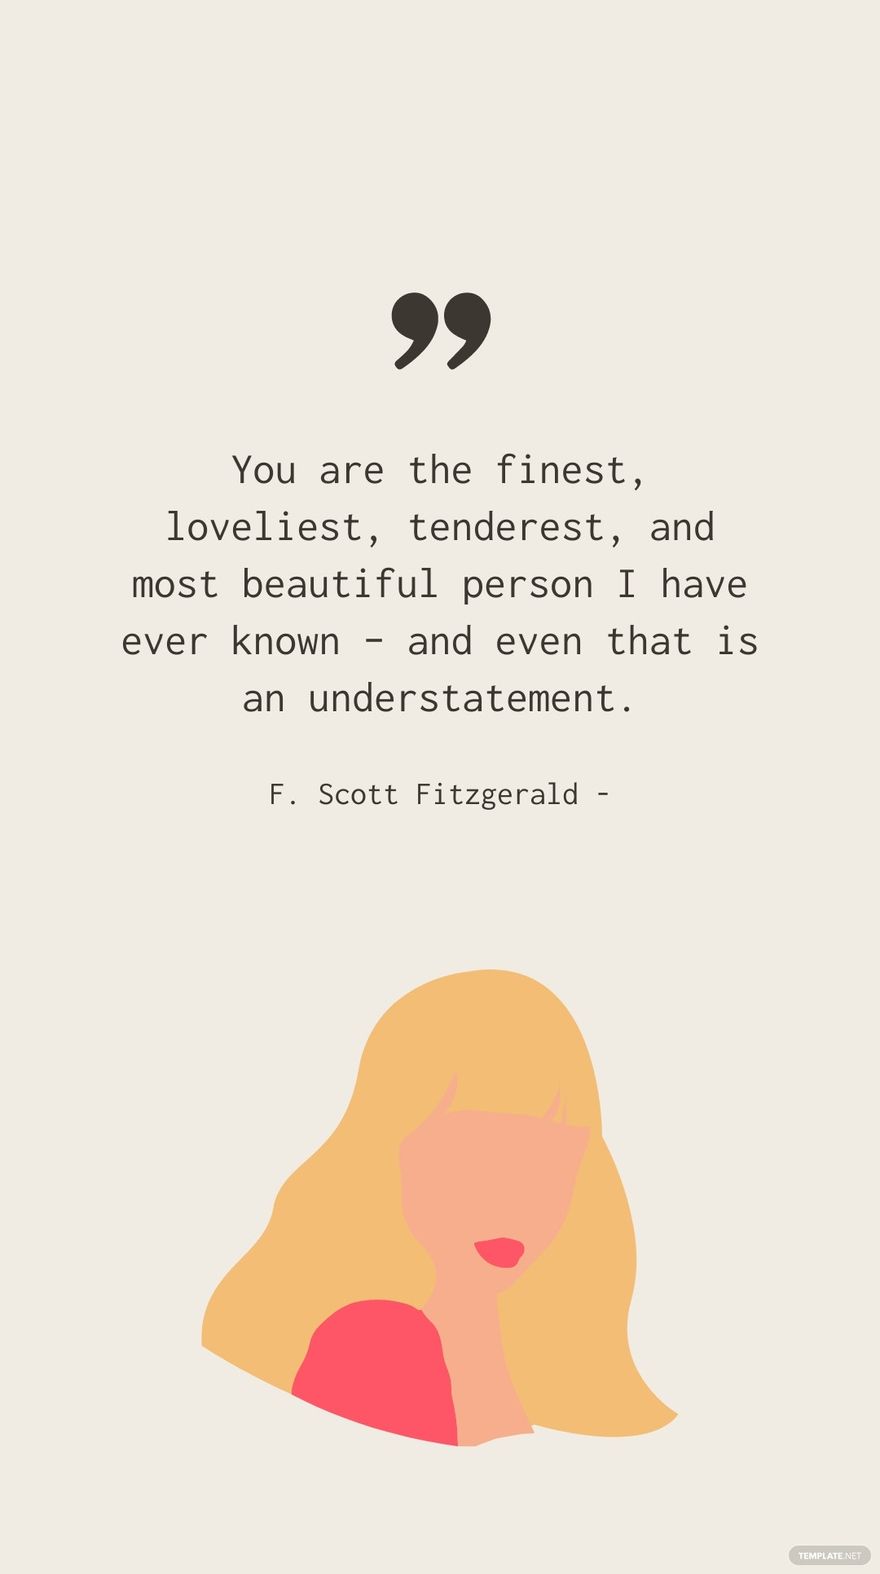 F. Scott Fitzgerald - You are the finest, loveliest, tenderest, and most beautiful person I have ever known – and even that is an understatement.